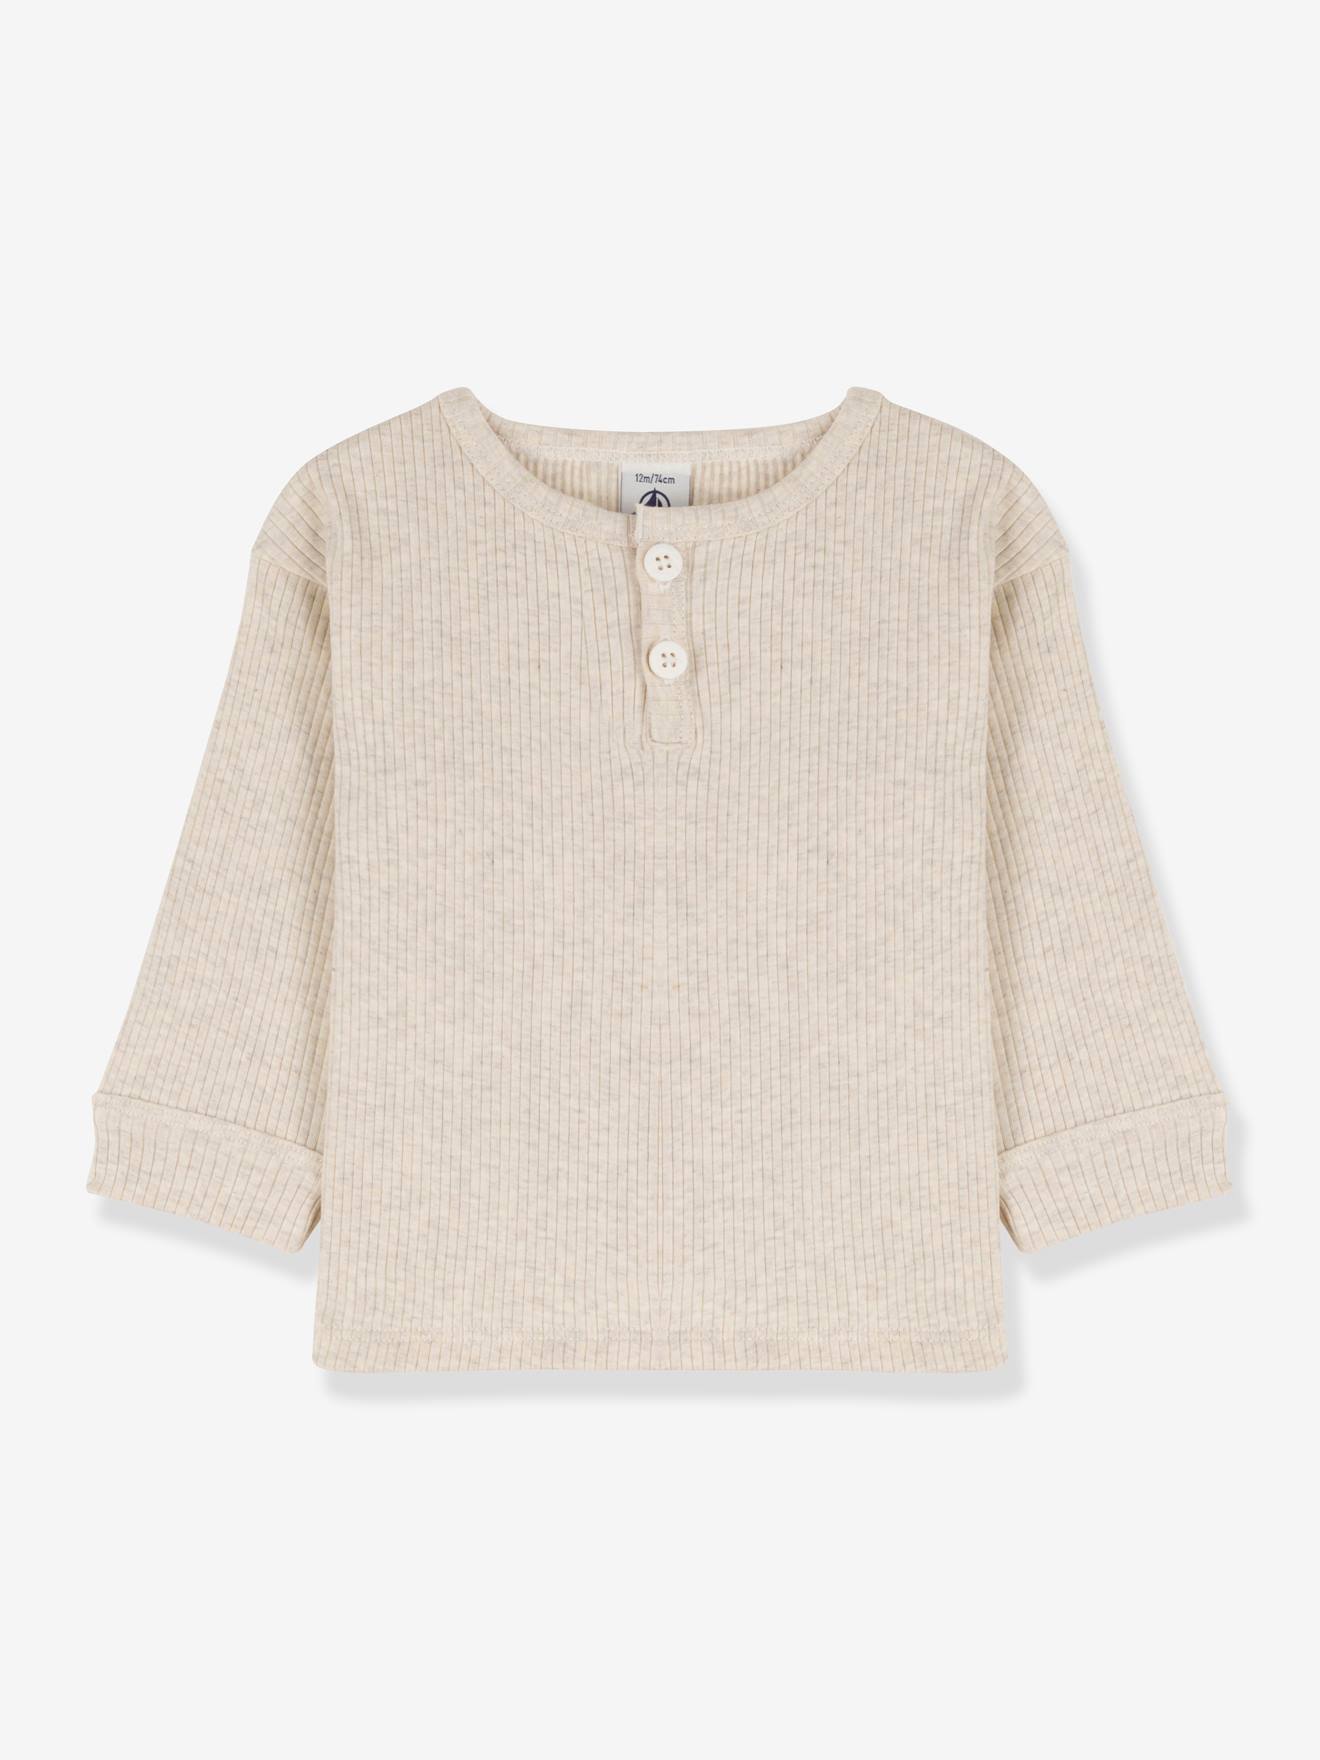 Long Sleeve Top in Organic Cotton, for Babies, by Petit Bateau grey